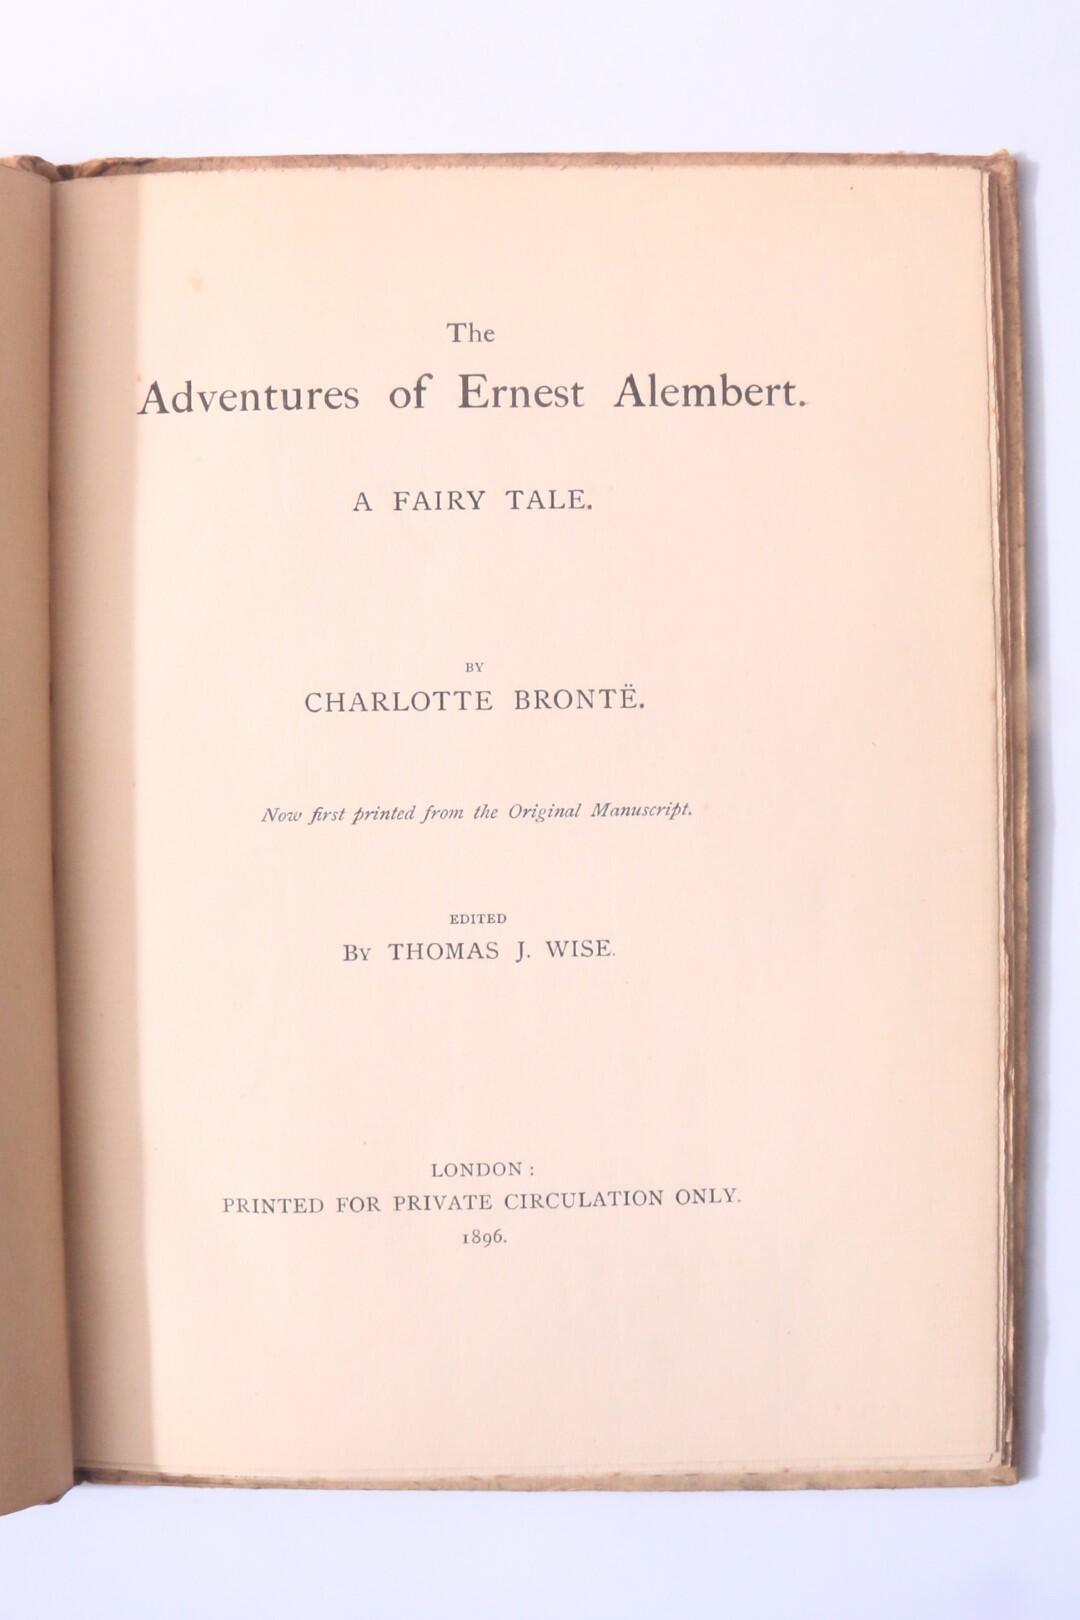 Charlotte Bronte - The Adventures of Ernest Alembert. A Fairy Tale. - Privately Printed, 1896, Limited Edition.